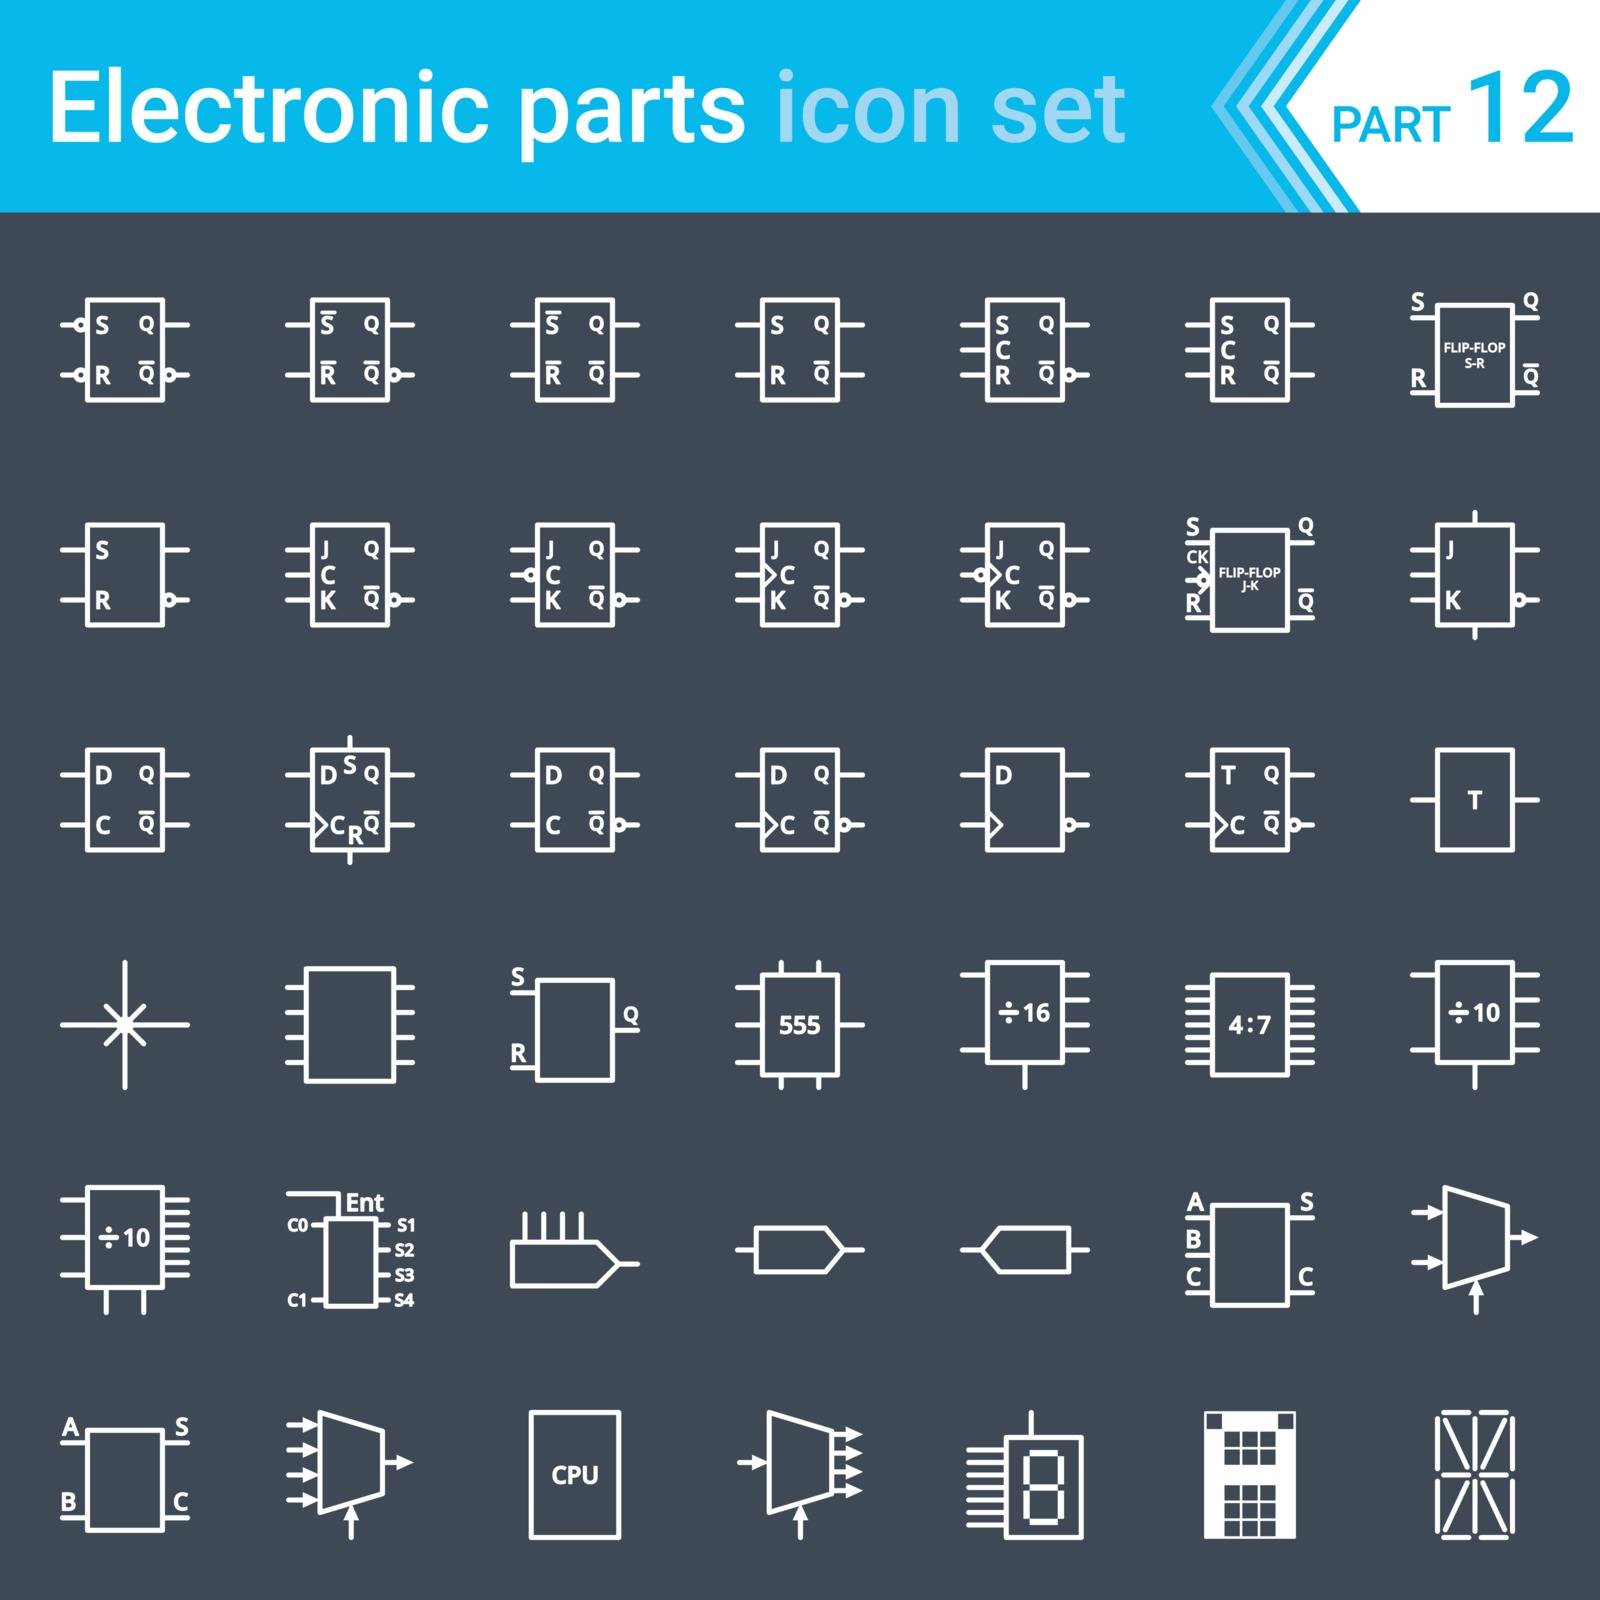 Electric and electronic icons, electric diagram symbols. Digital electronics, flip-flop, logic circuit, display, programming conventions. by vermicule